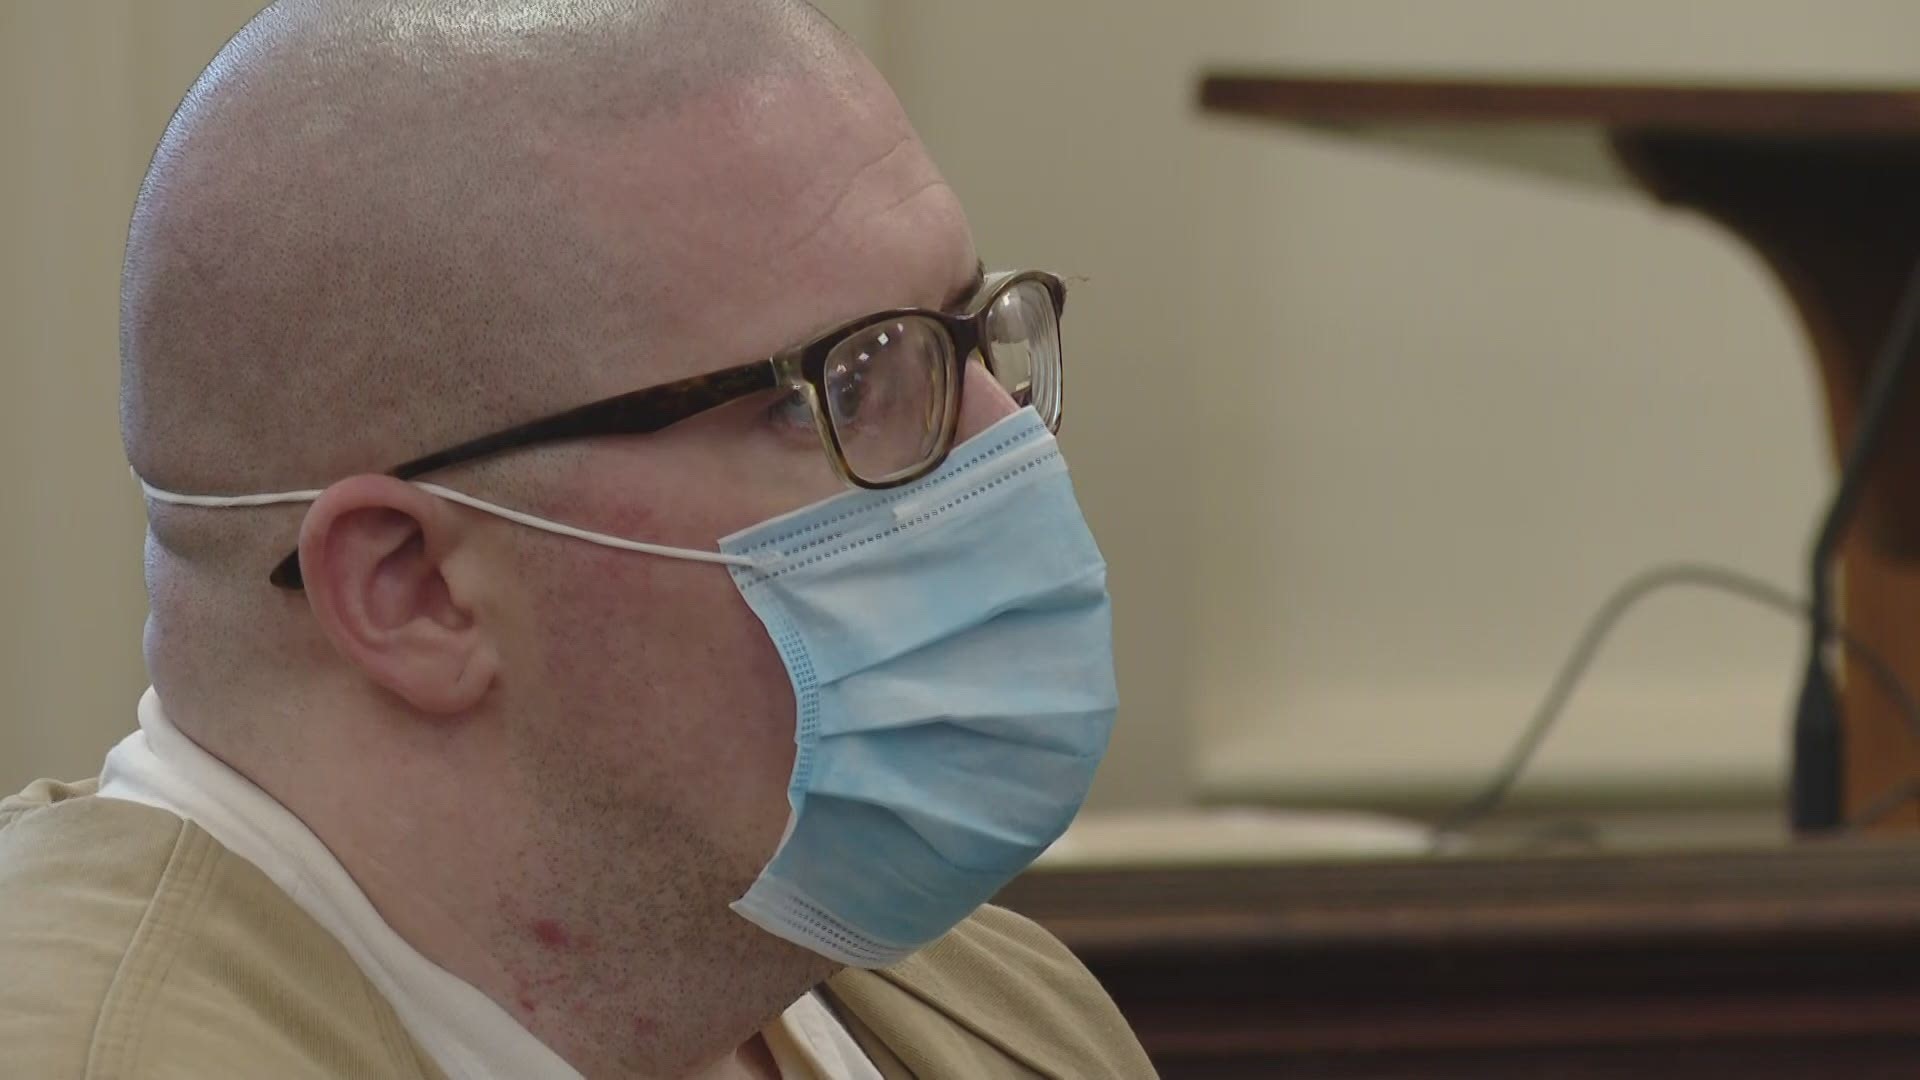 Dustan Bentley will spend 40 years in prison for murdering his roommate, William Popplewell, in March 2019.